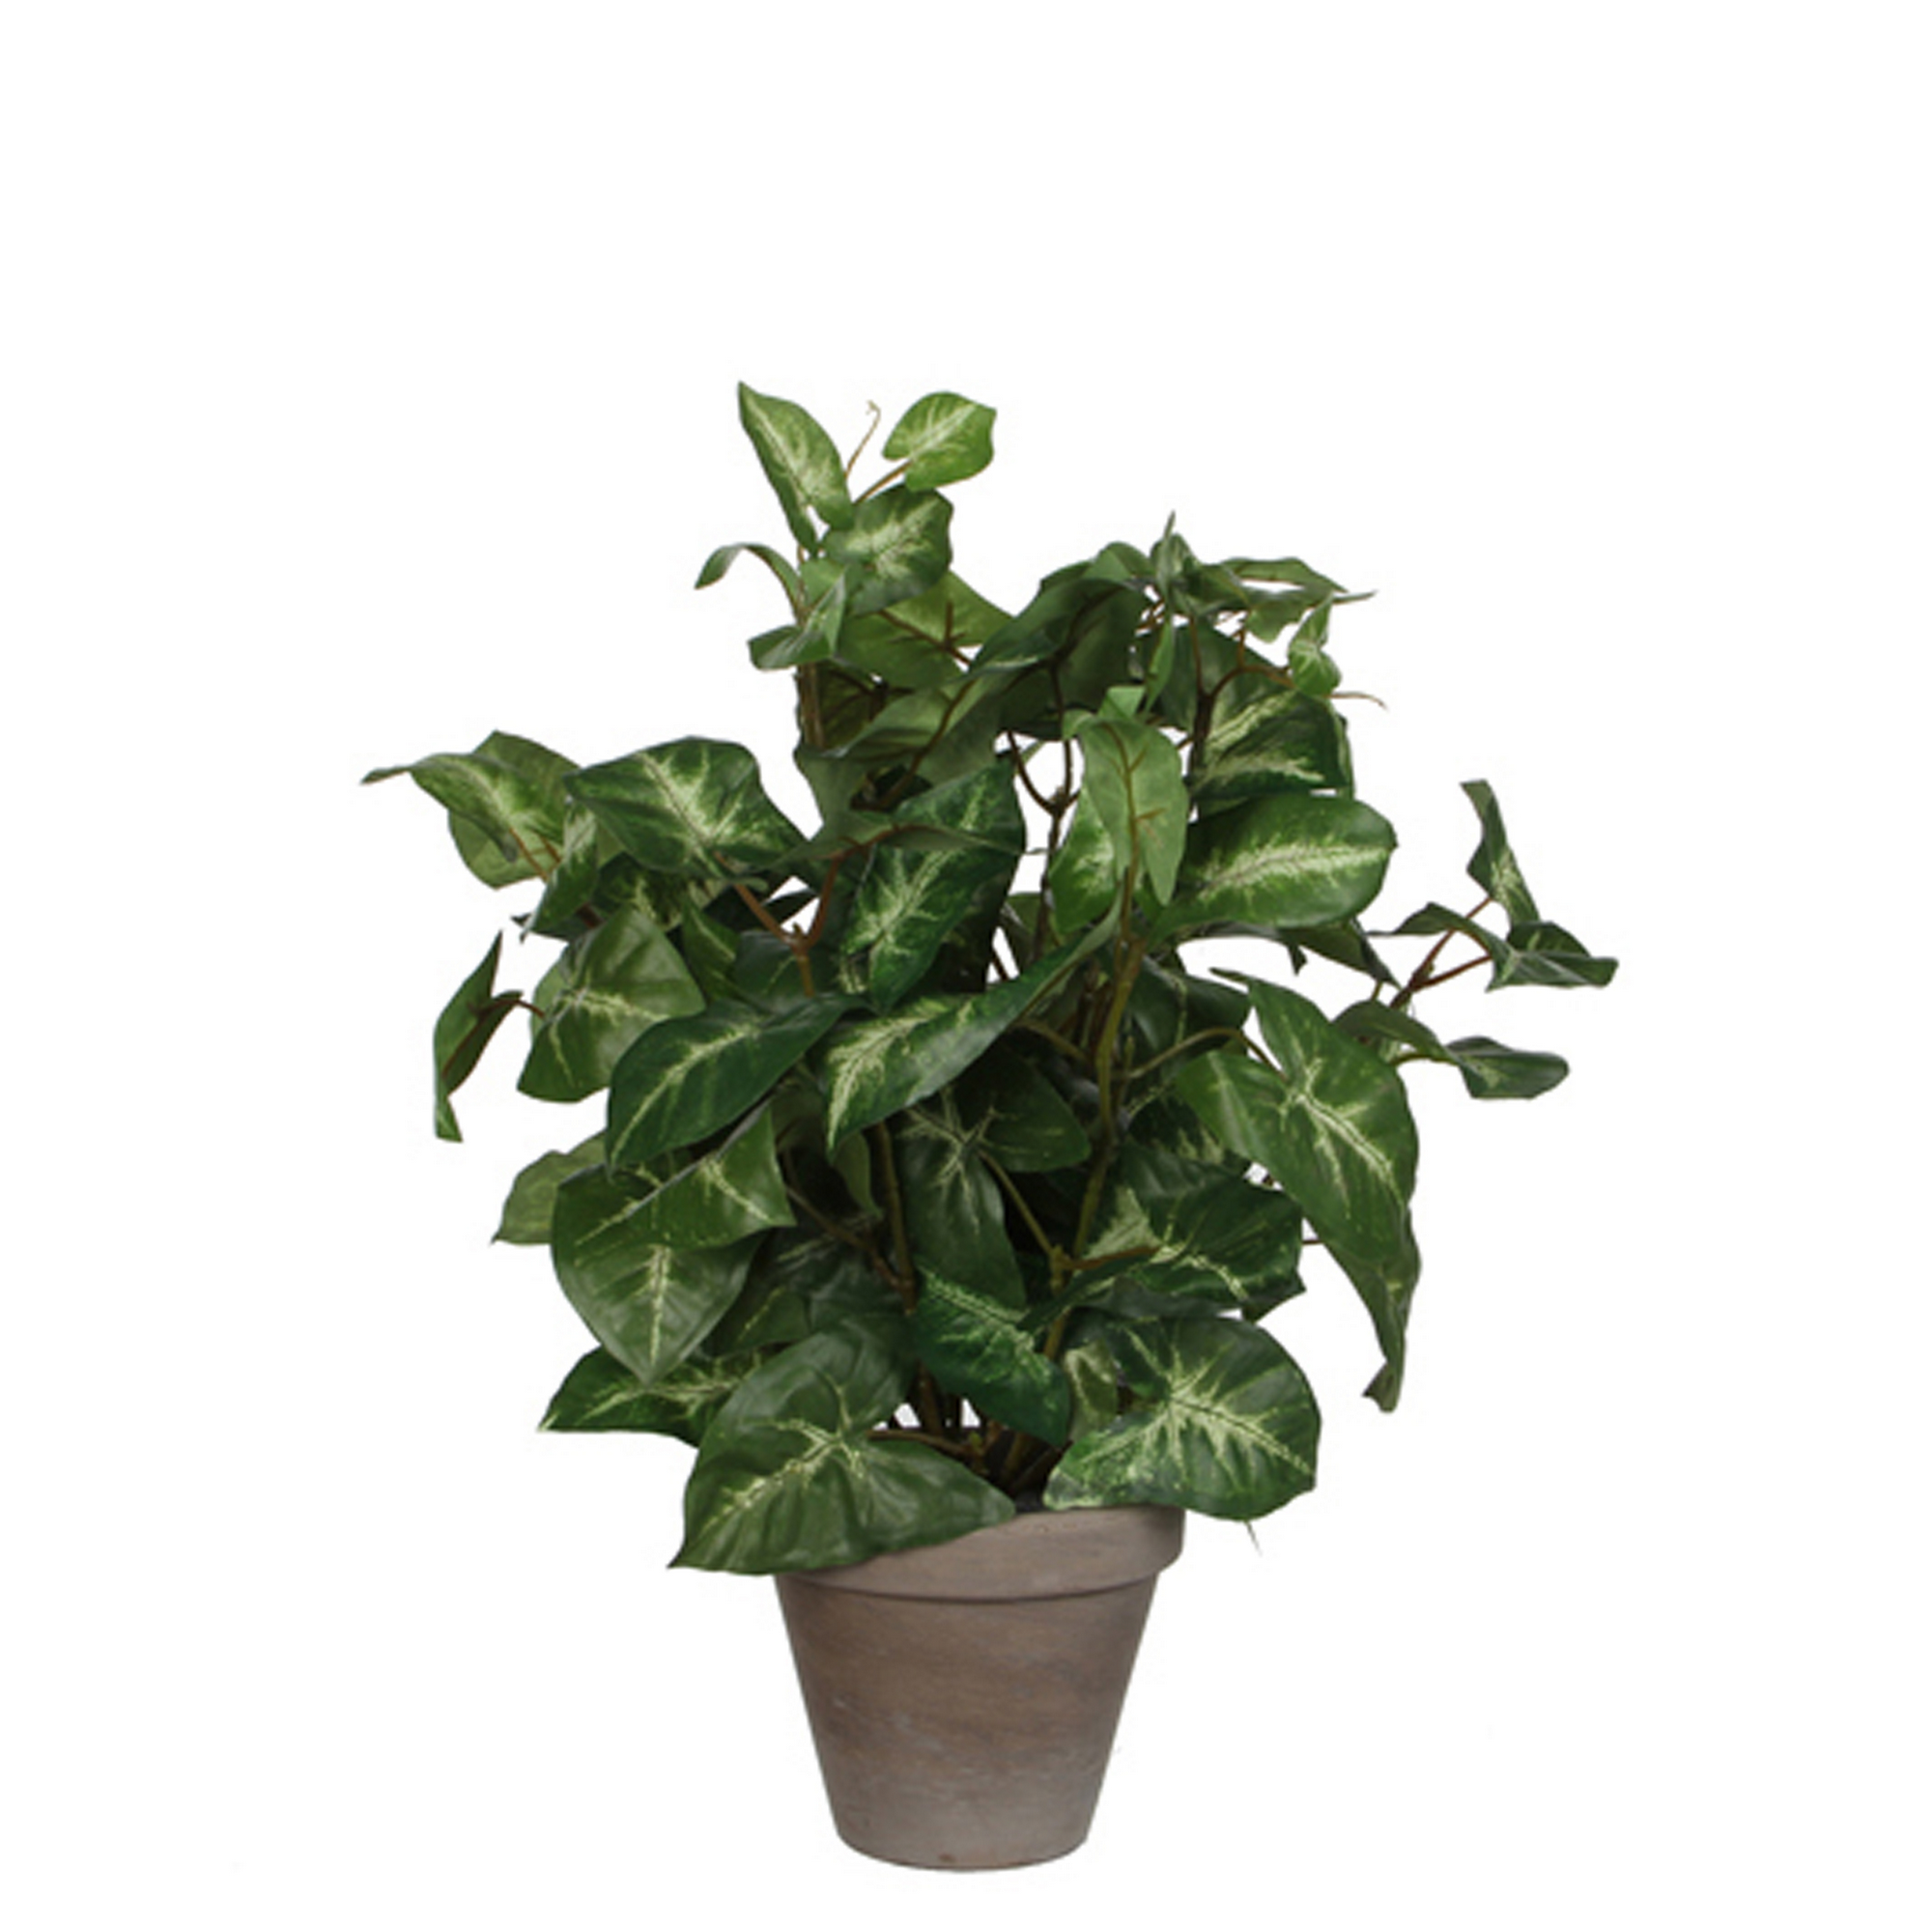 Kunstpflanze Syngonium im Topf 25 x 35 cm + product picture